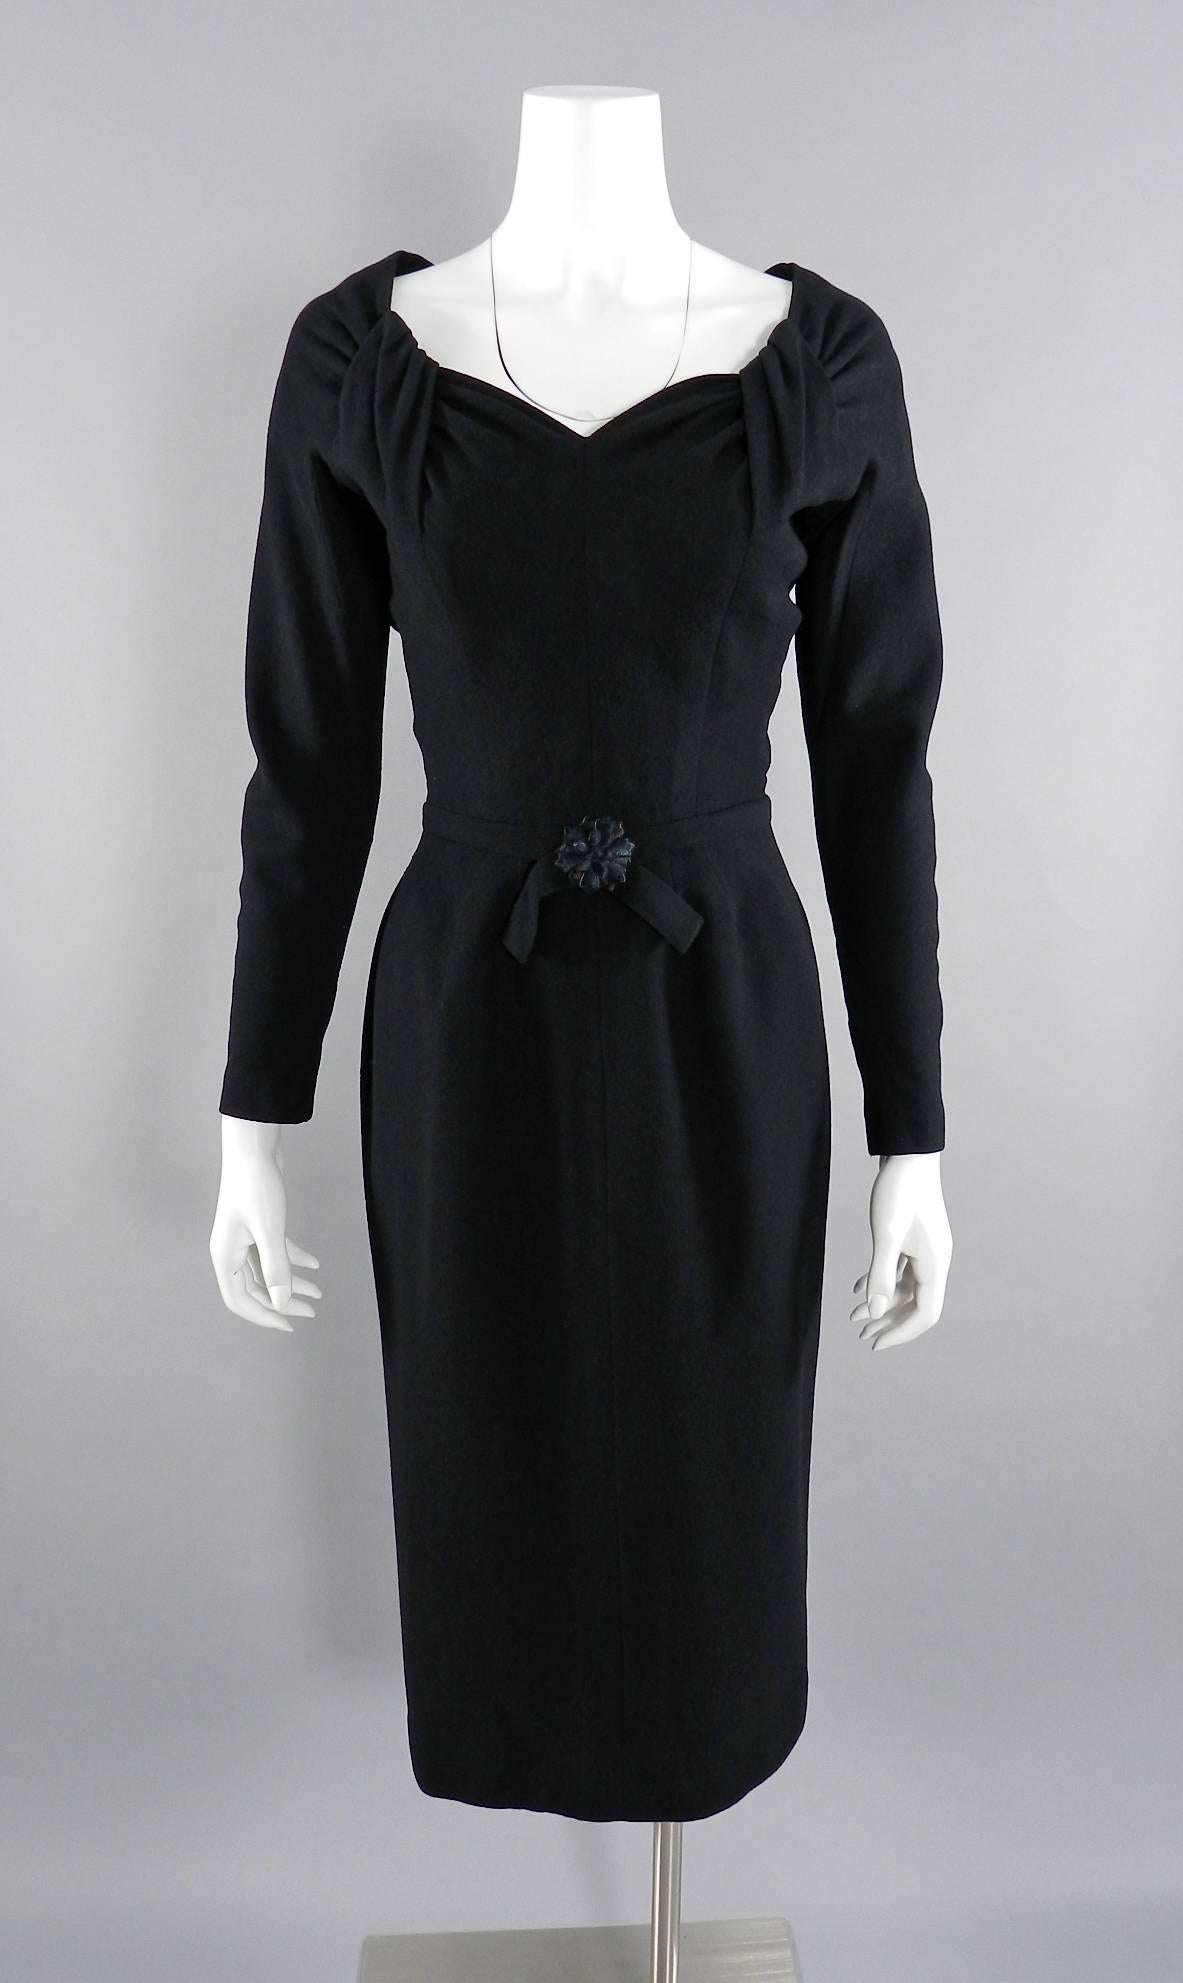 Vintage Jacques Fath dress and jacket suit. Circa 1950's.  Wool dress has a 25" waist, measures 37" at bust, and 39" at hip. Has a sweetheart neckline, flower at front waist, and metal back zipper. Jacket is straight-cut with large